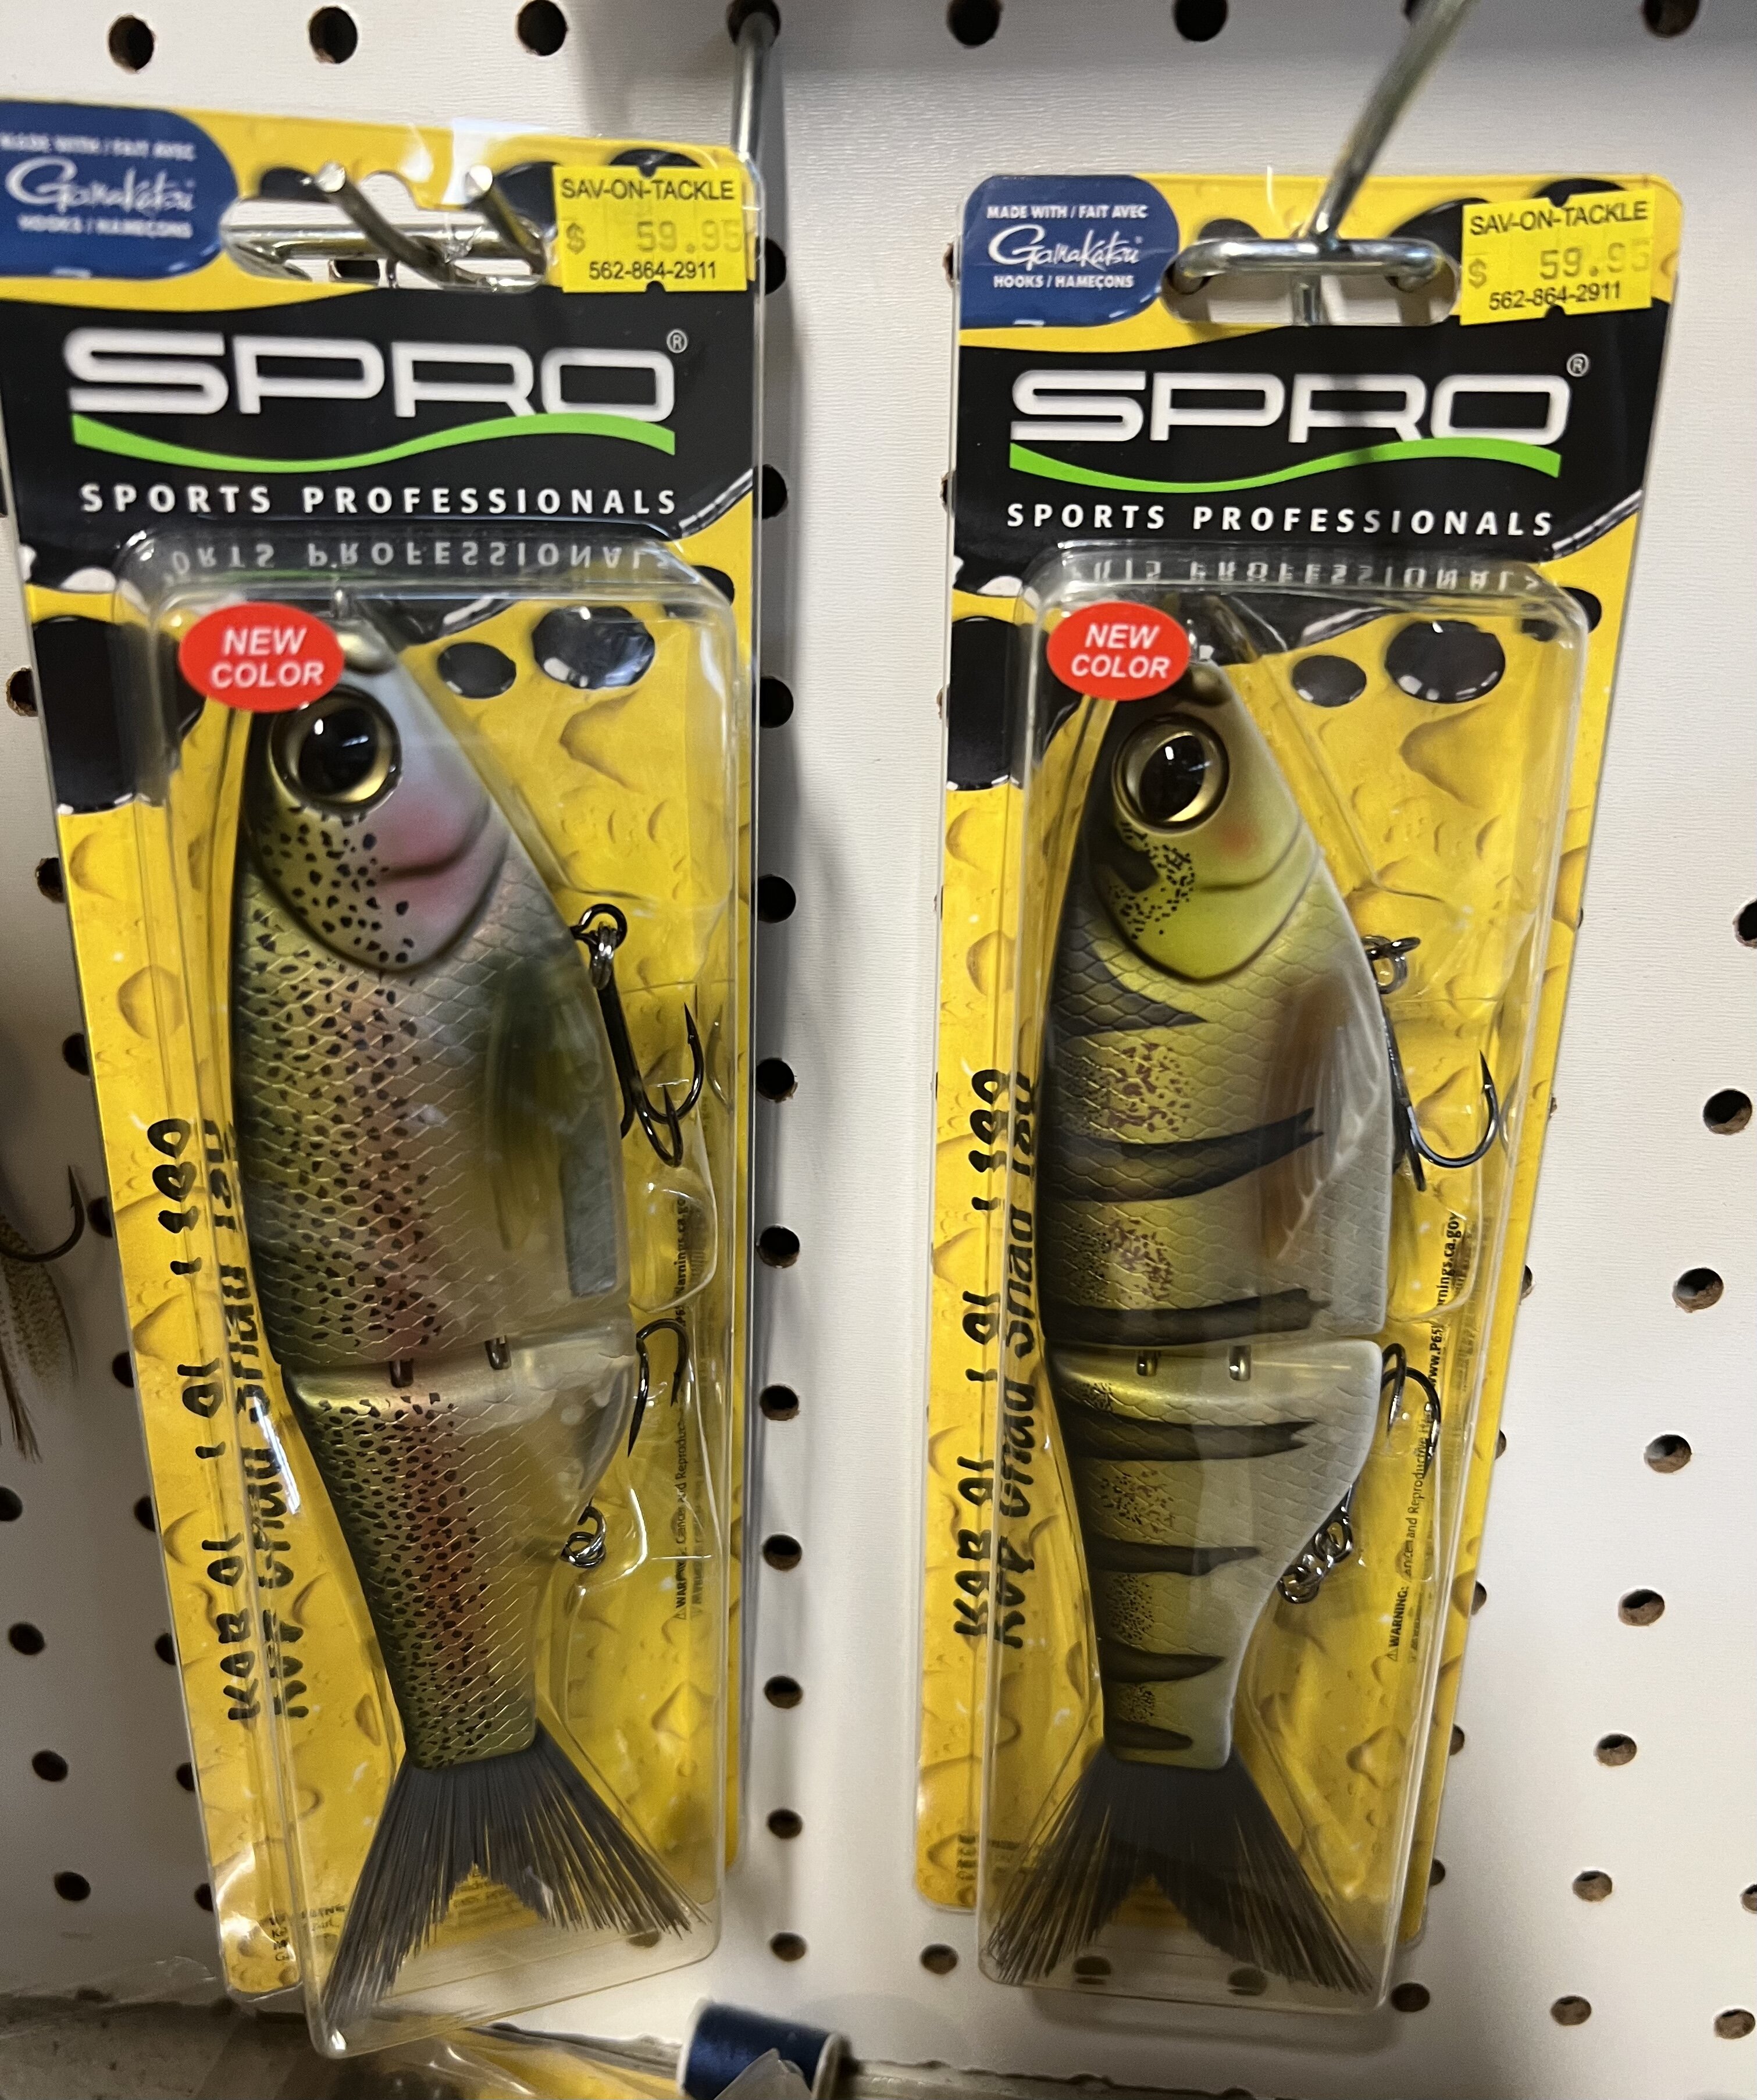 New Spro Chad Shad 180 - Trout & Perch - Black Market - Swimbait